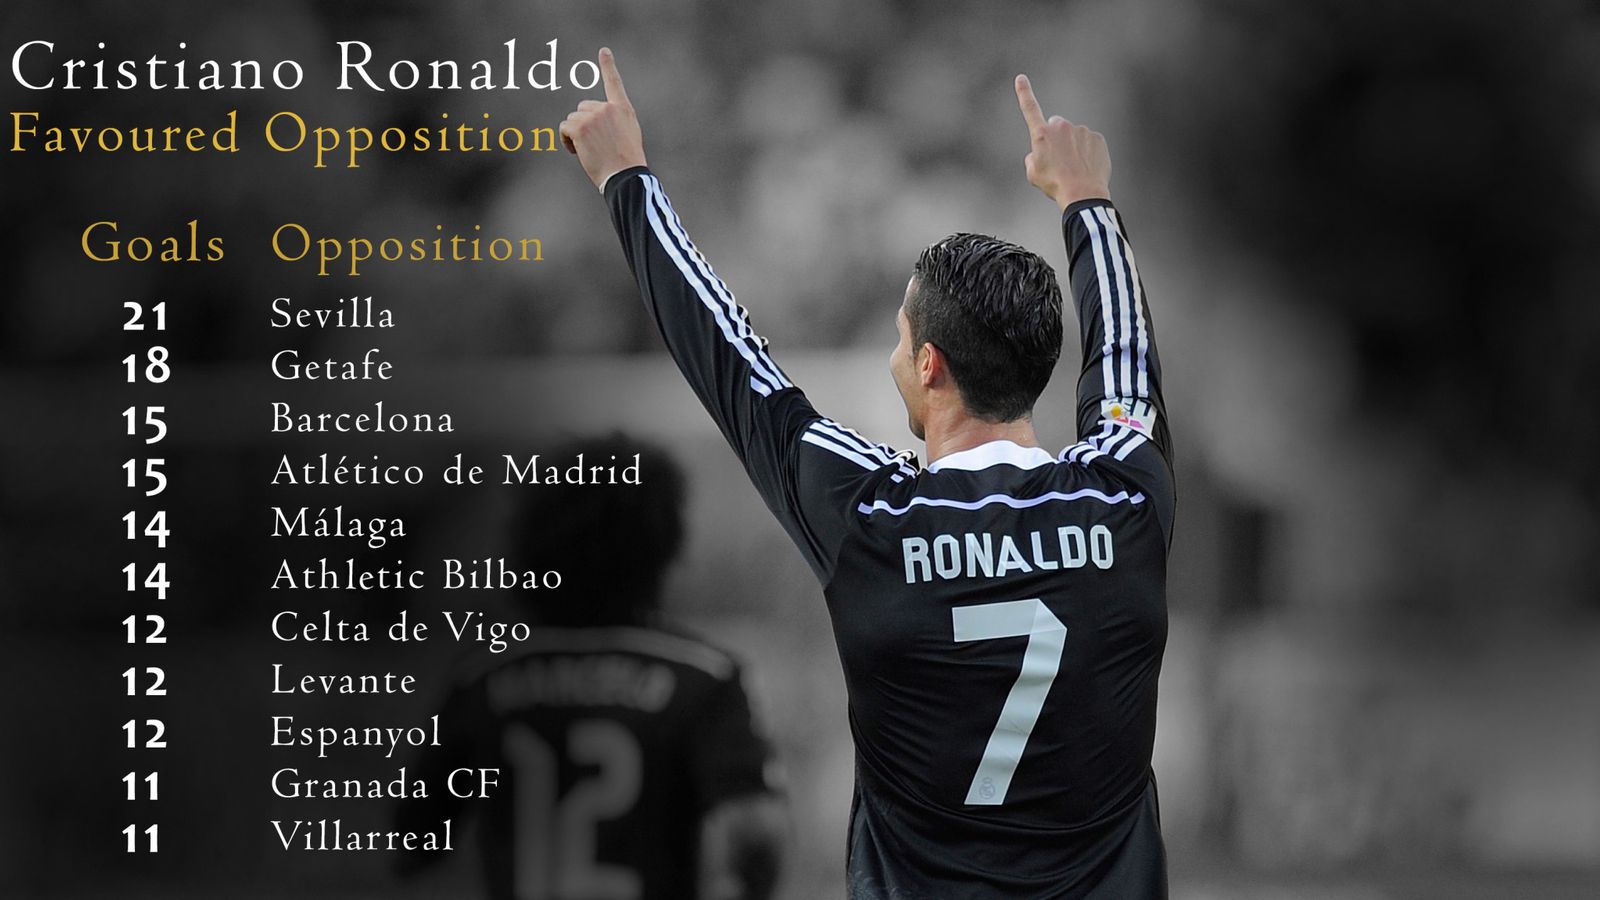 Cristiano Ronaldo's 499 goals The numbers behind his remarkable